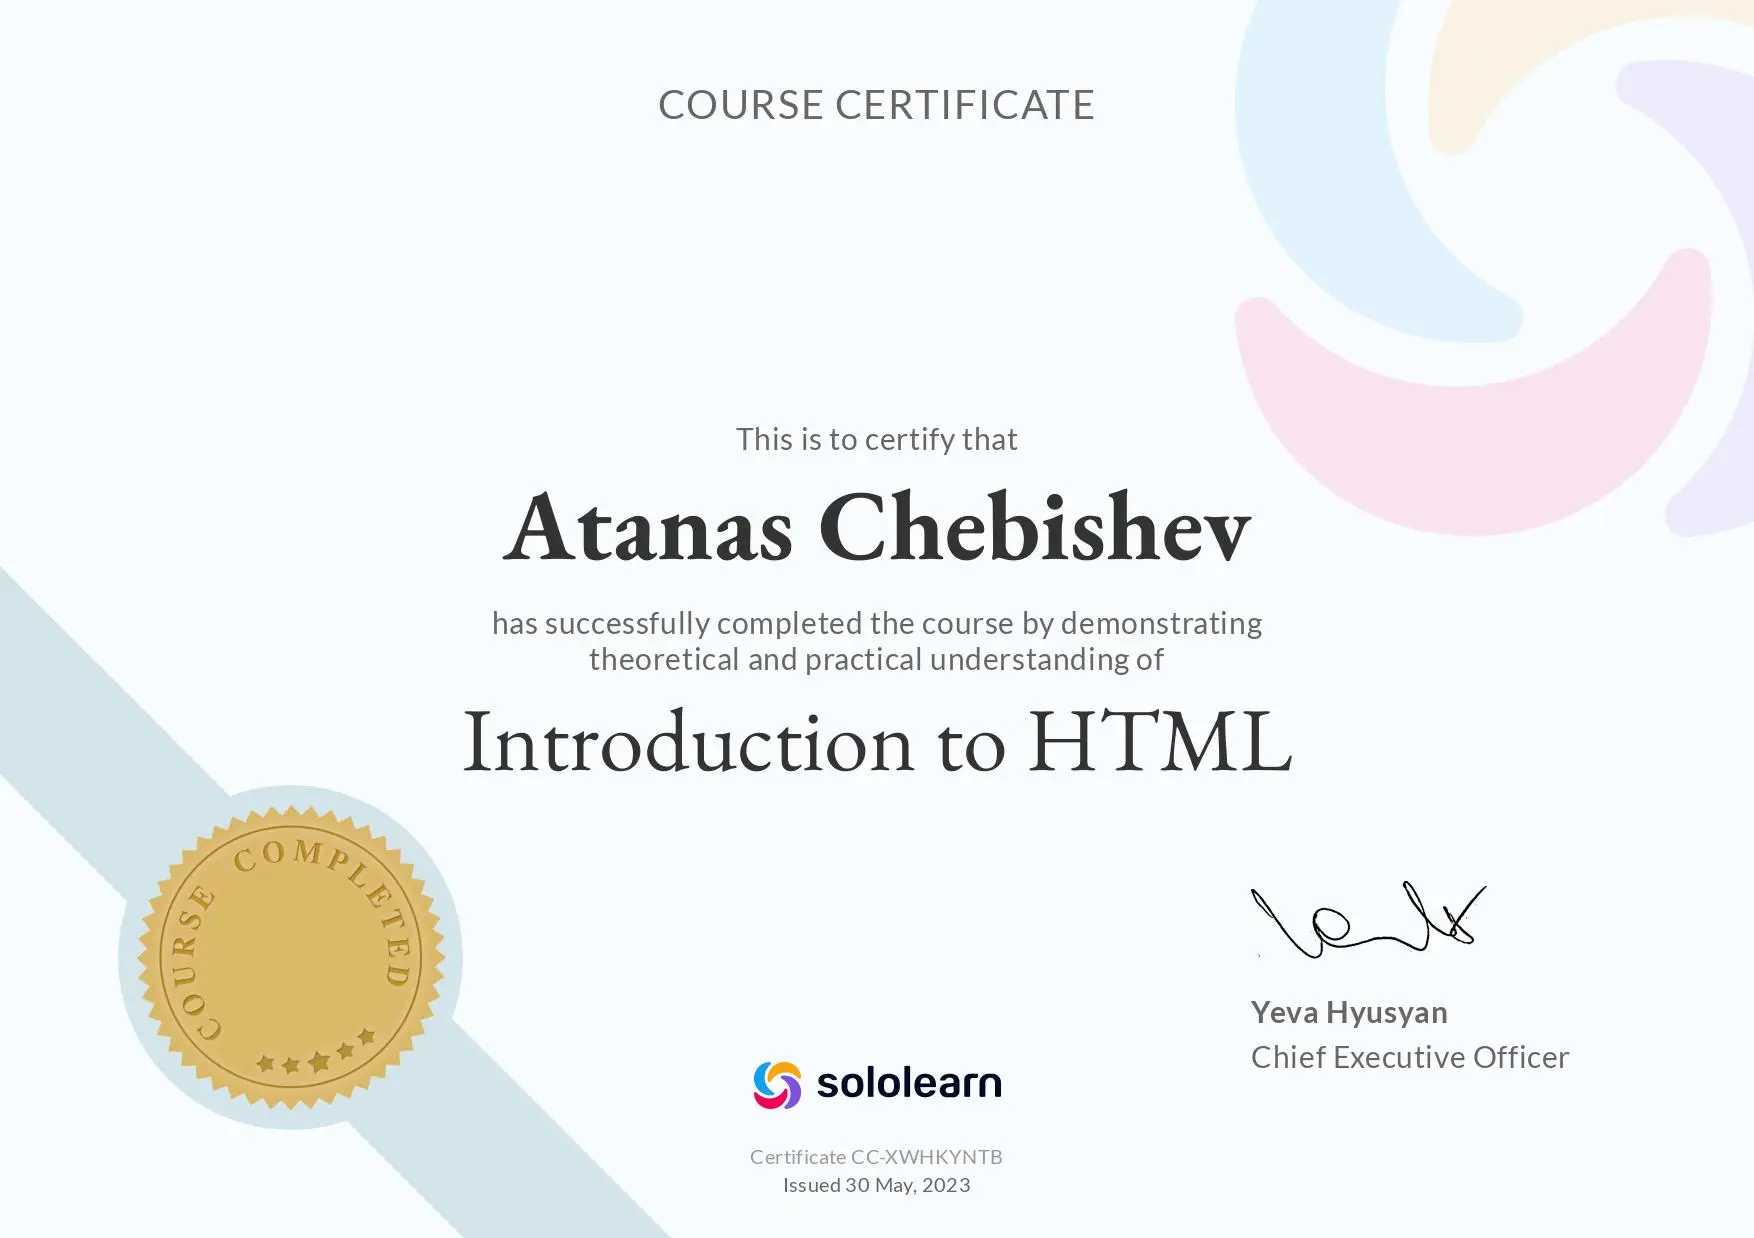 Sololearn Introduction to HTML certificate